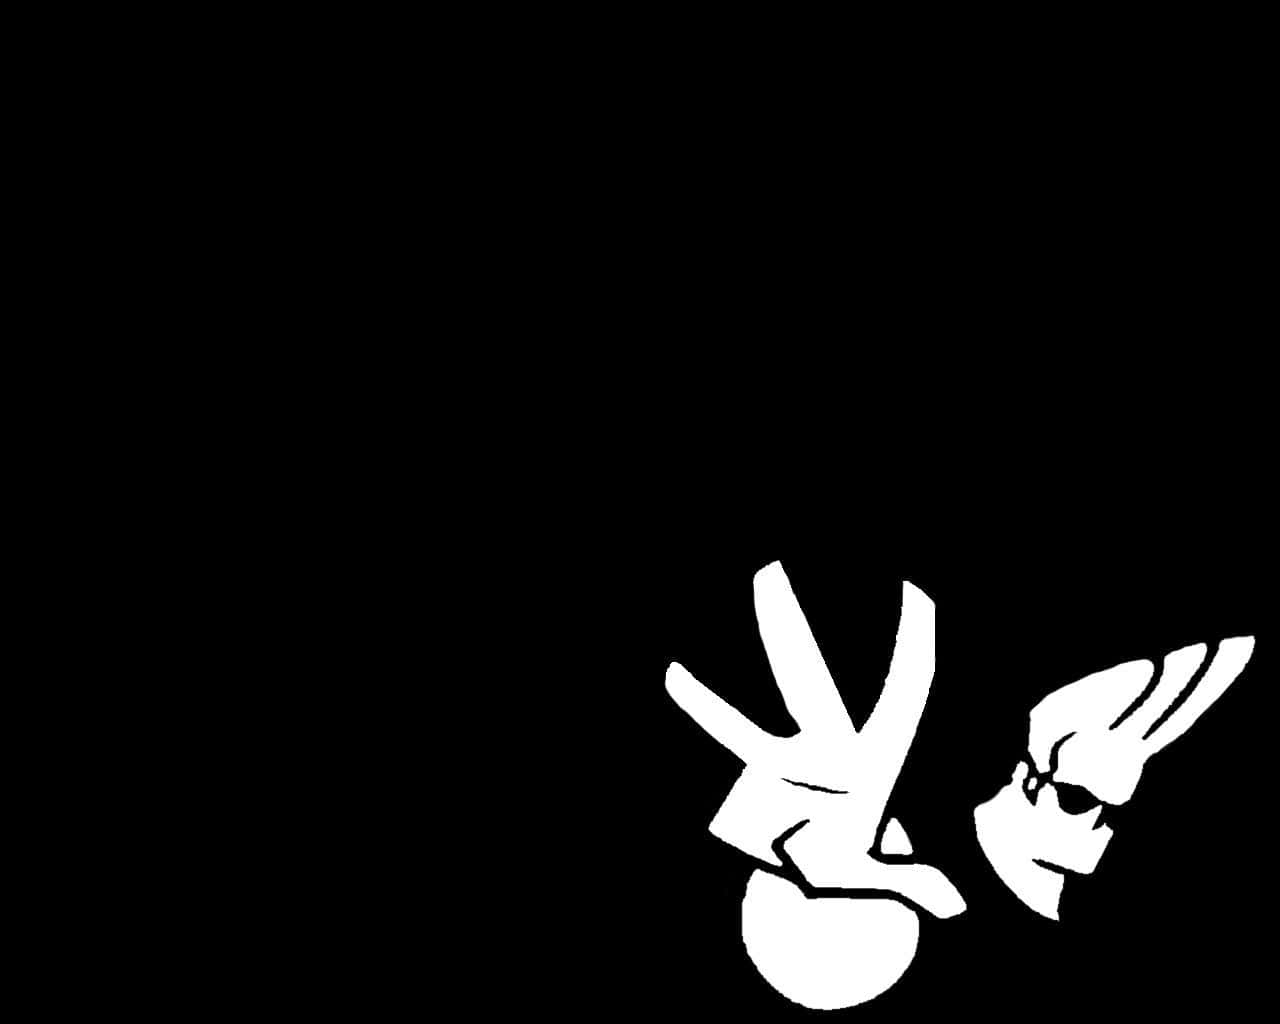 Download a black background with various cartoon characters on it Wallpaper